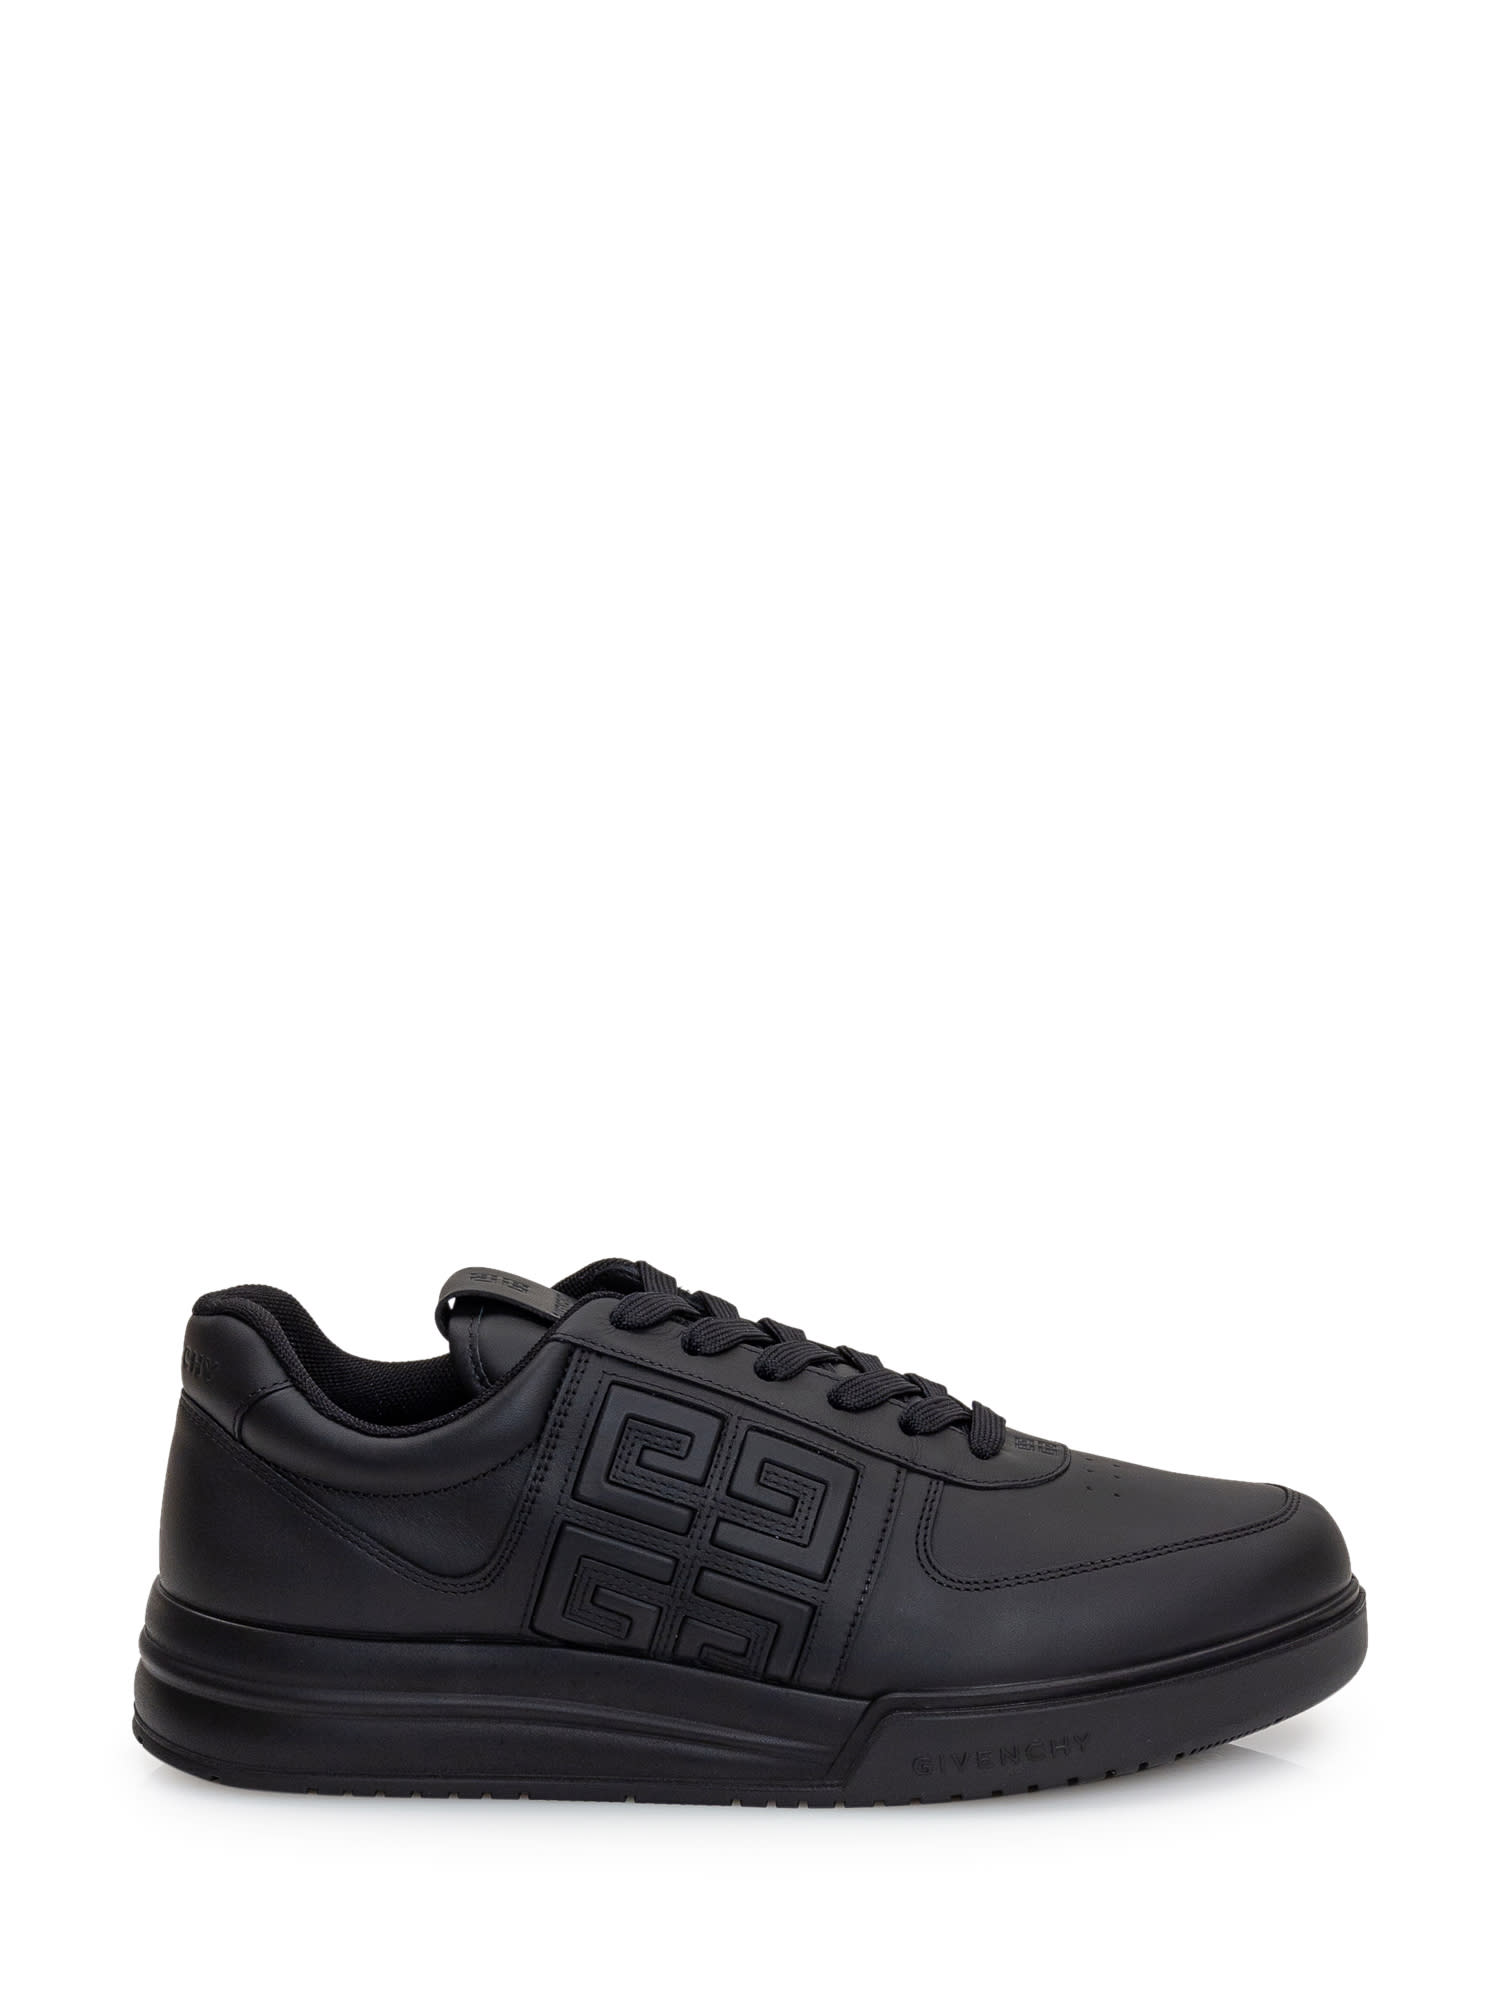 Shop Givenchy G4 Sneaker In Black